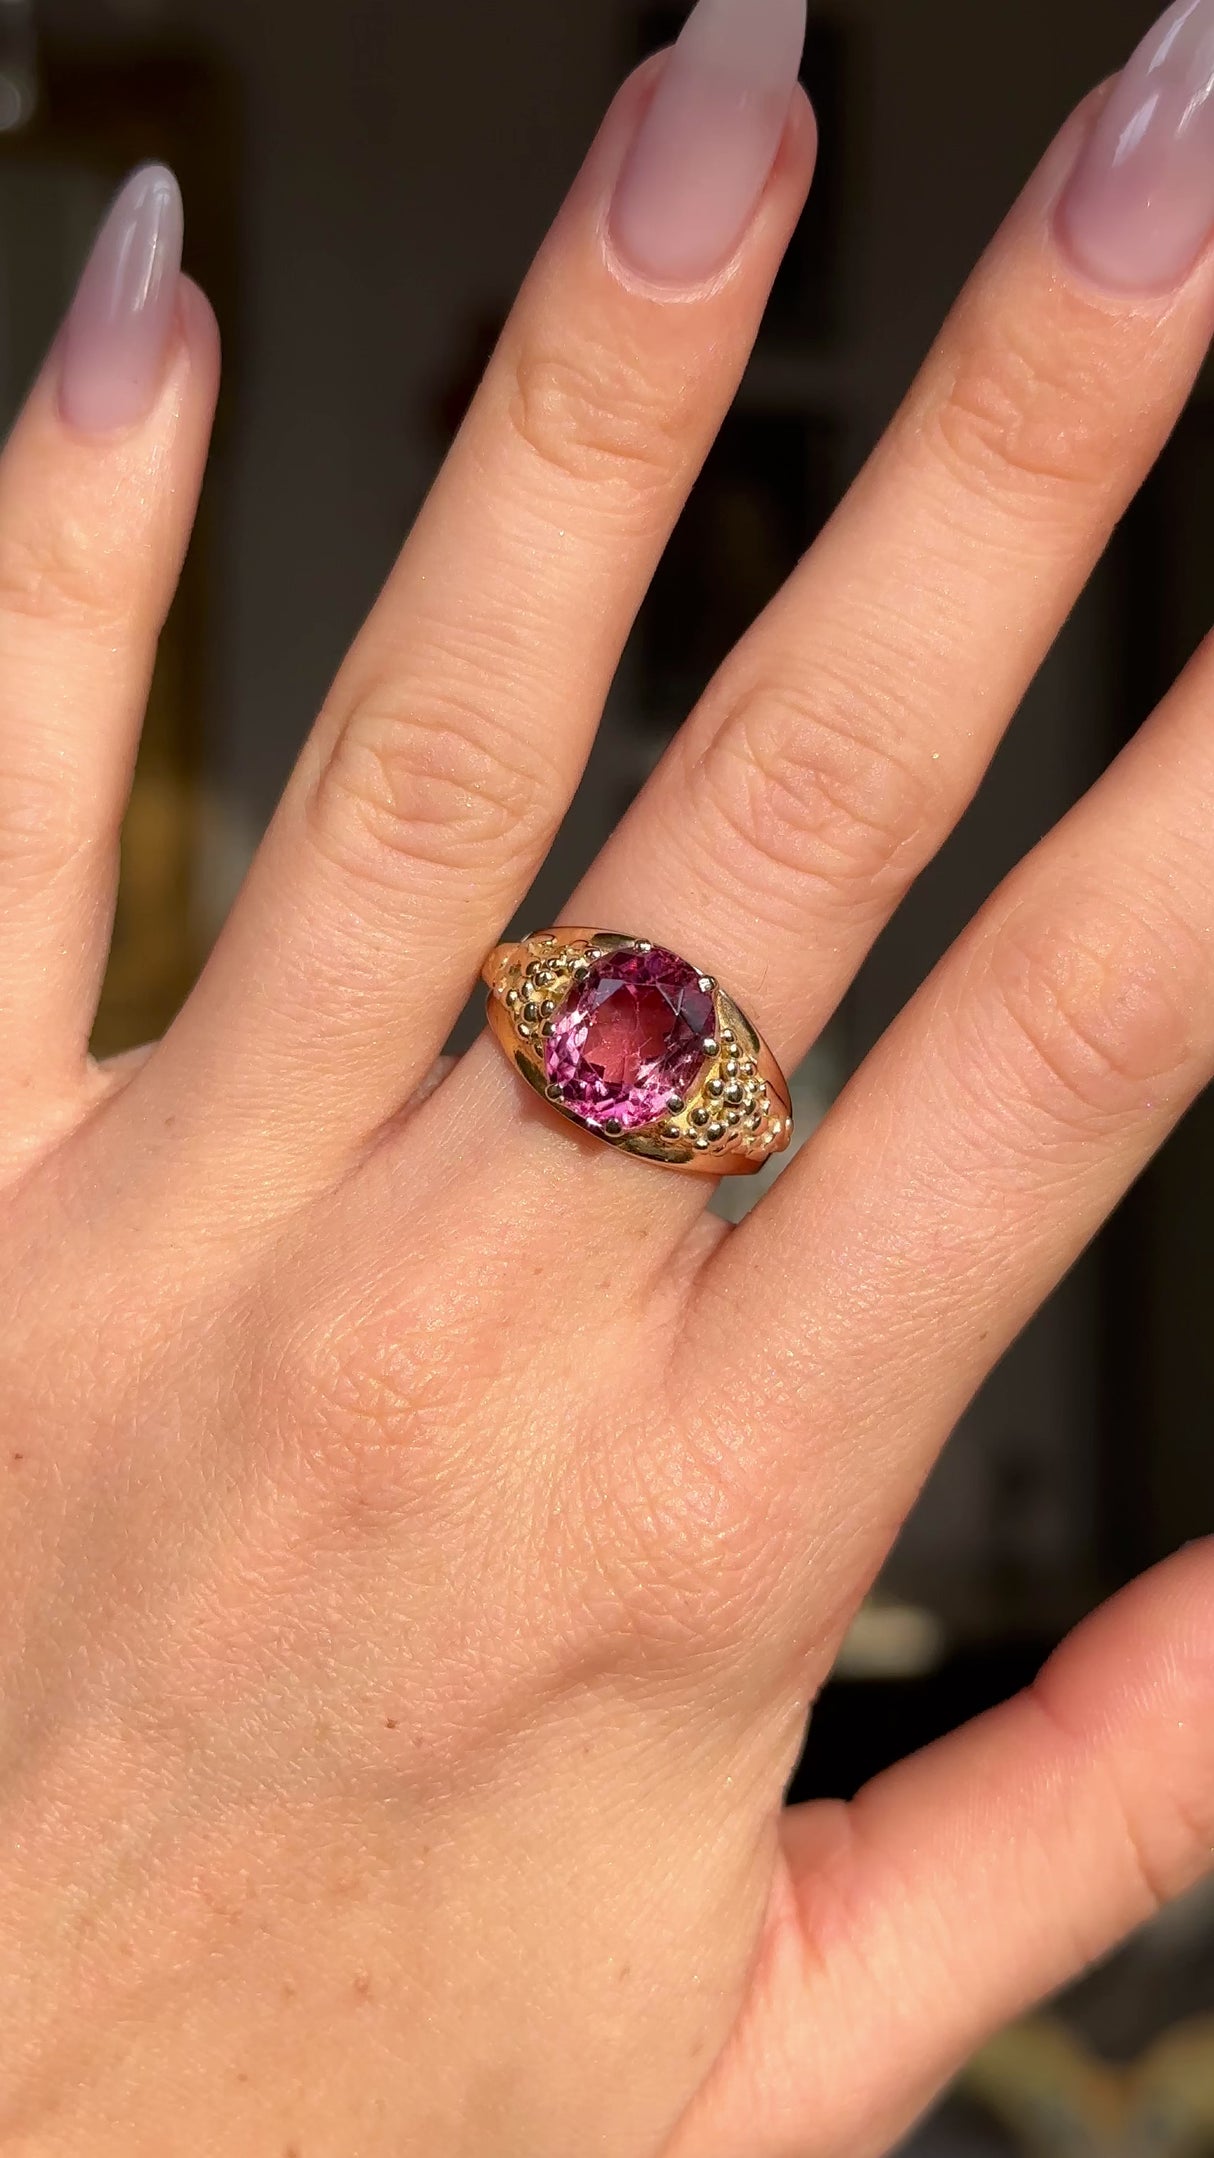 Victorian antique pink tourmaline ring worn on hand and moved around to give perspective.